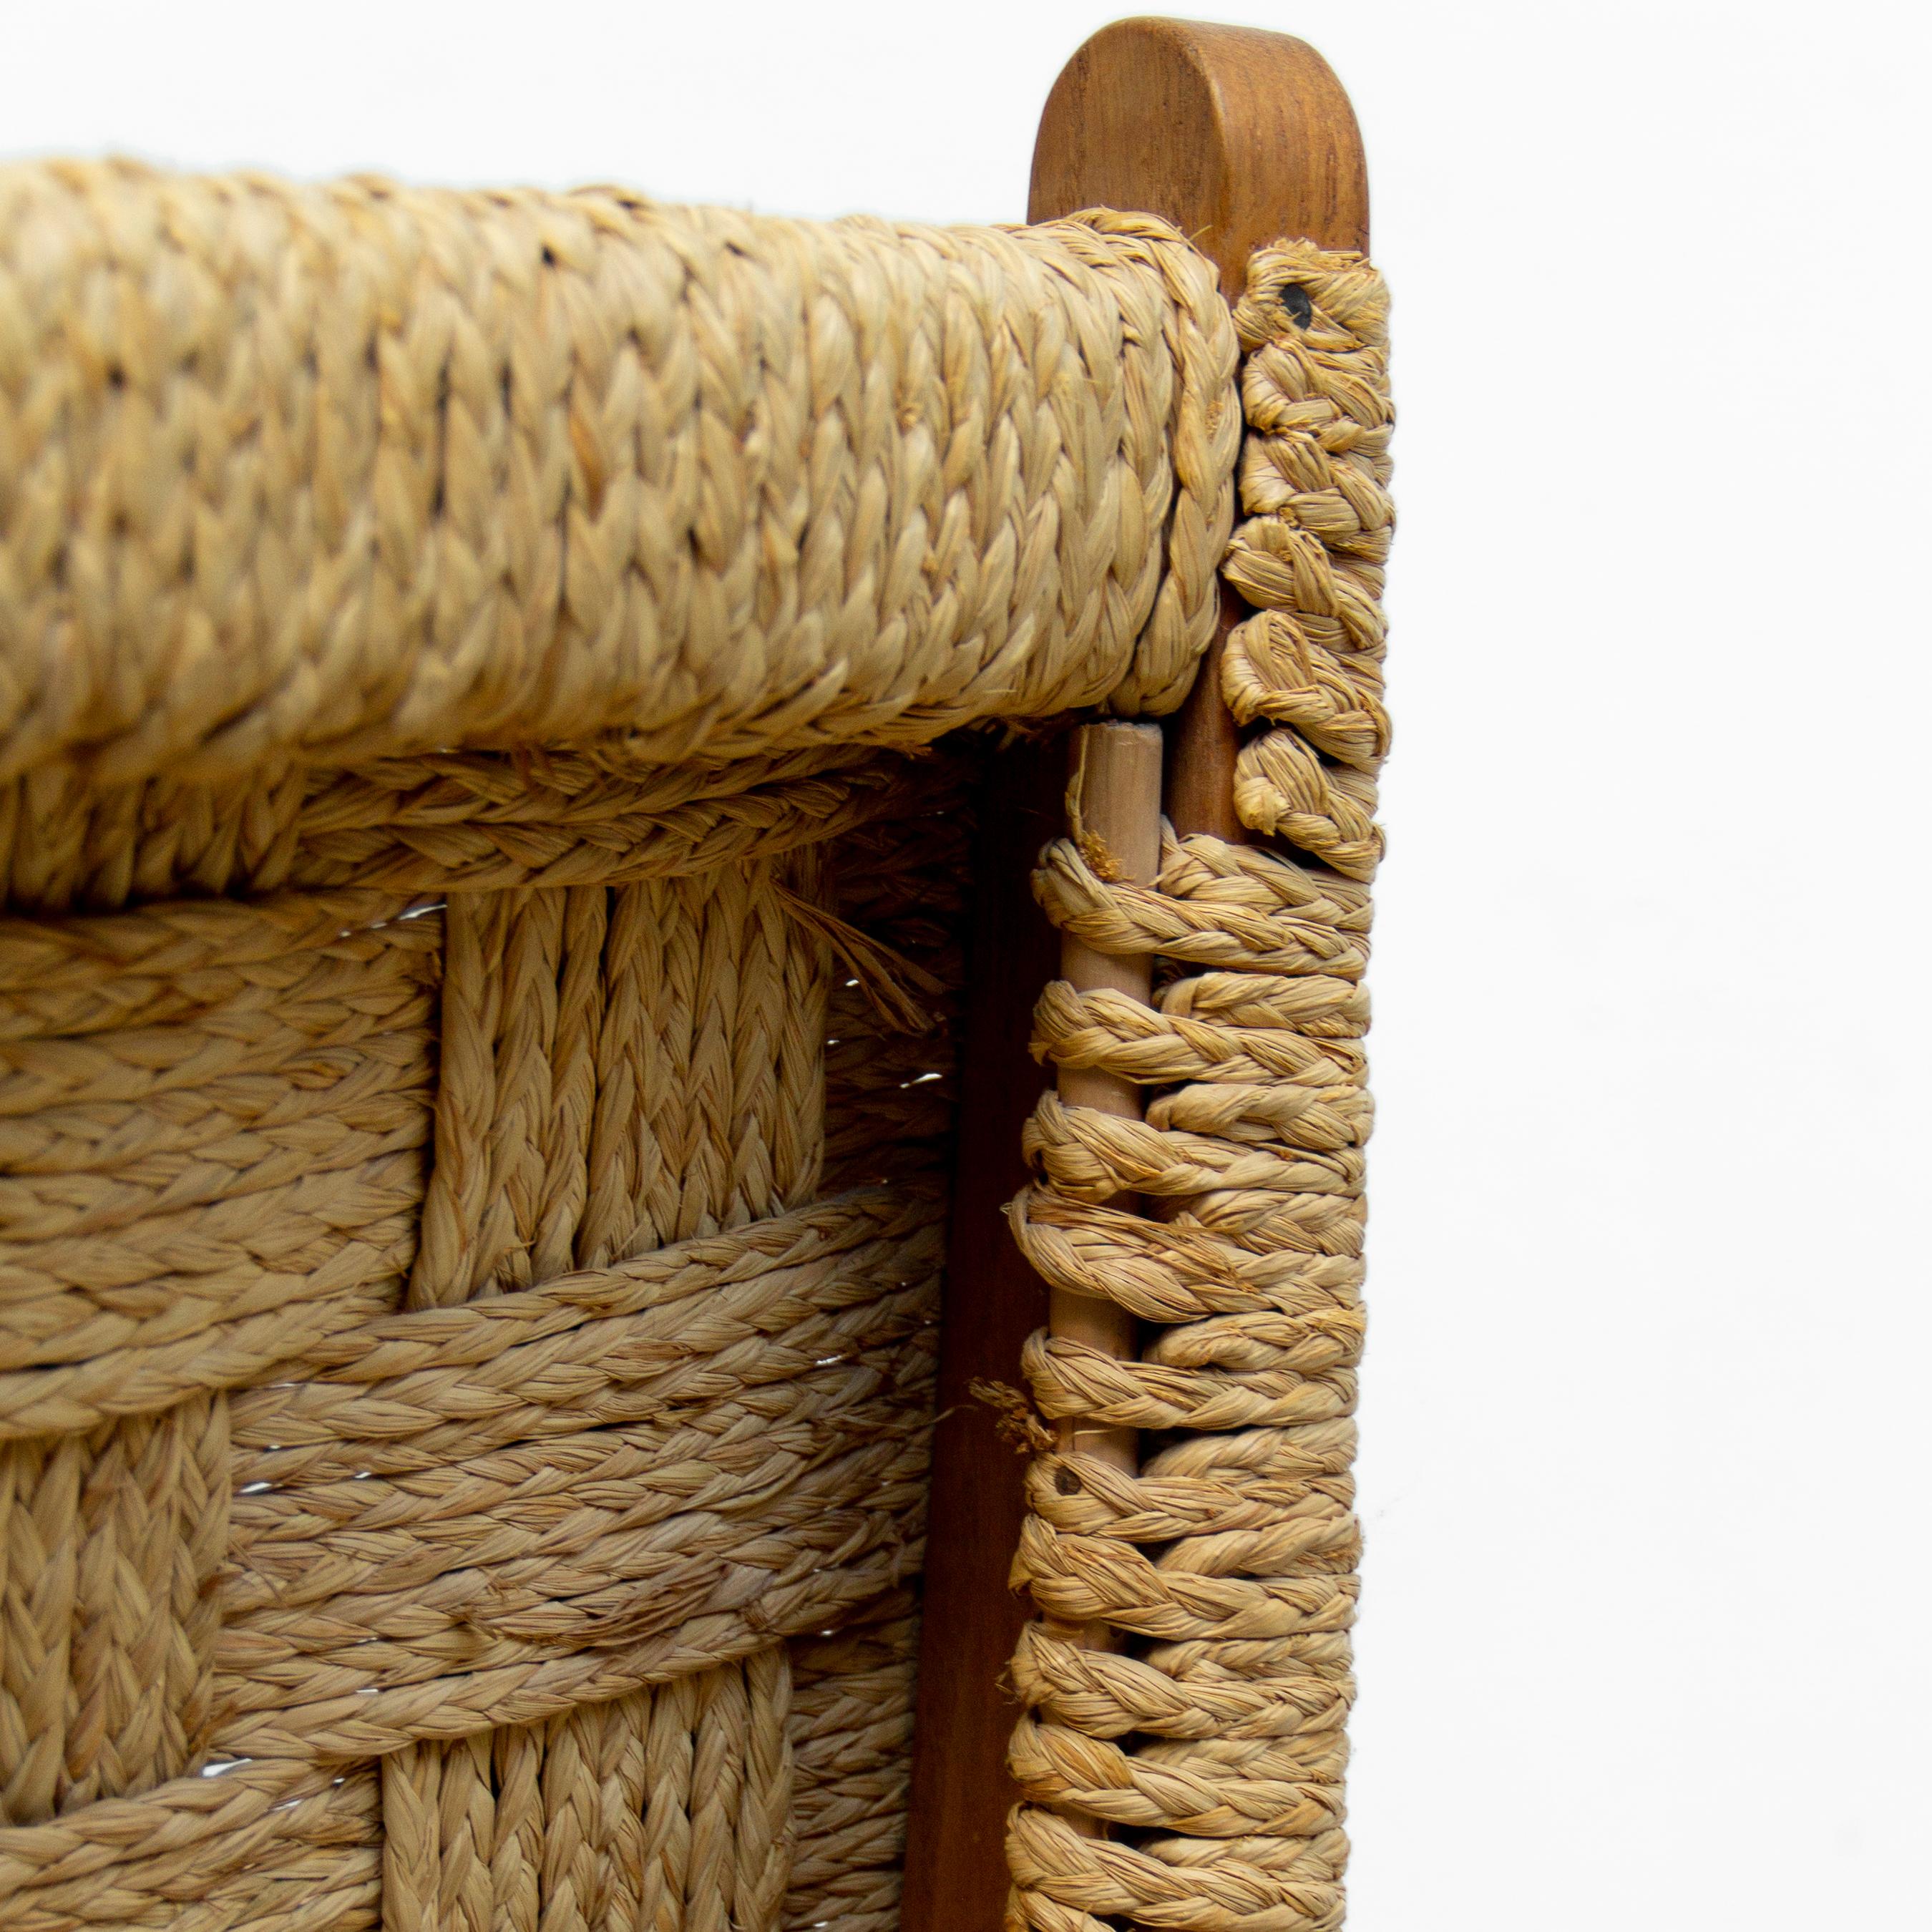 Brutalist Rare Modernist Bold Oakwood Lounge Chair and Handcrafted Raffia Woven Seating